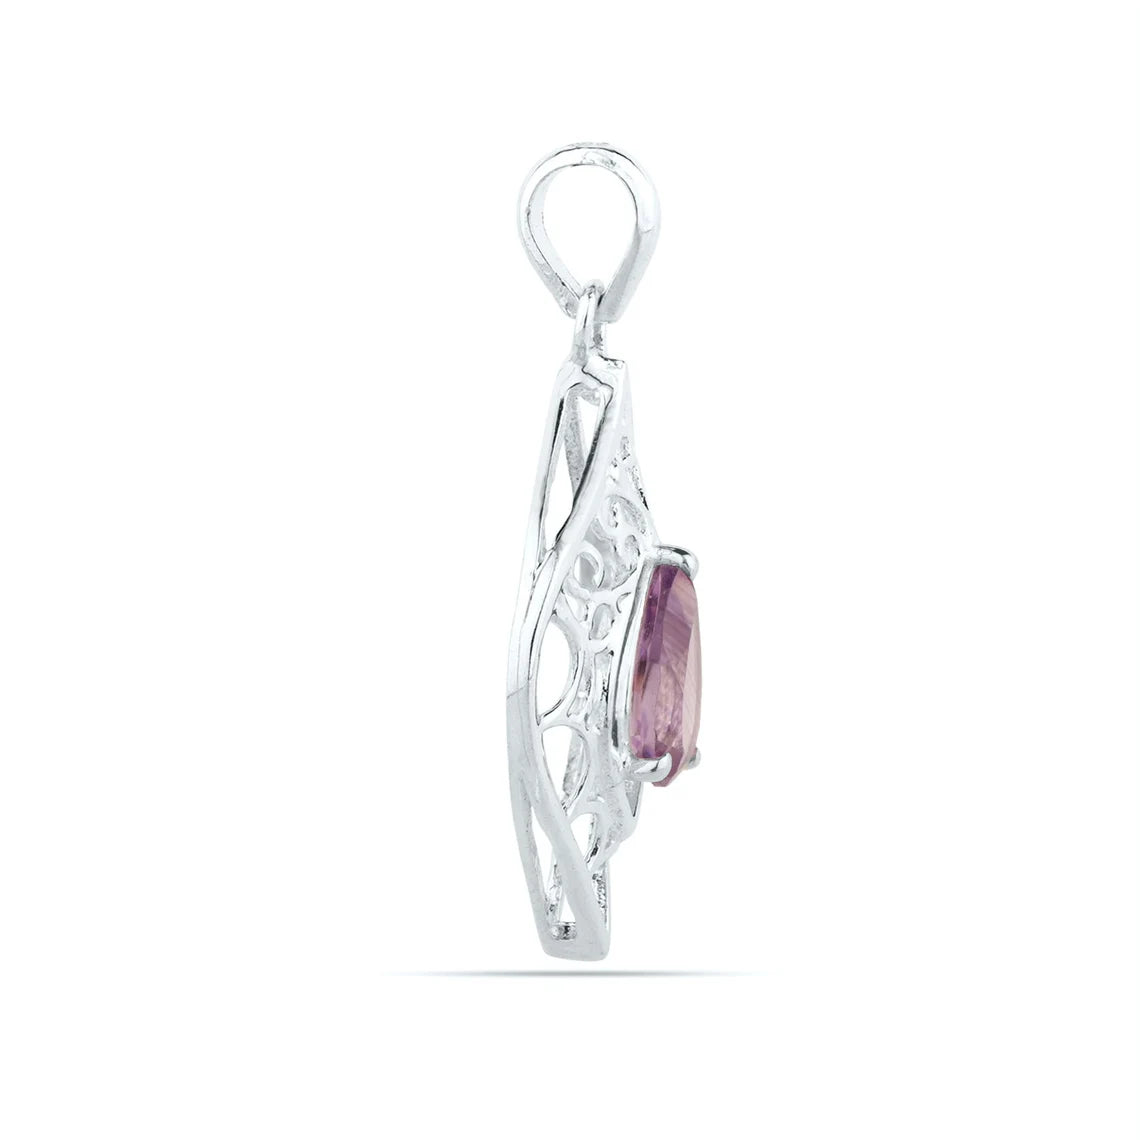 Purple amethyst pendant, faceted, set in 92.5 sterling silver